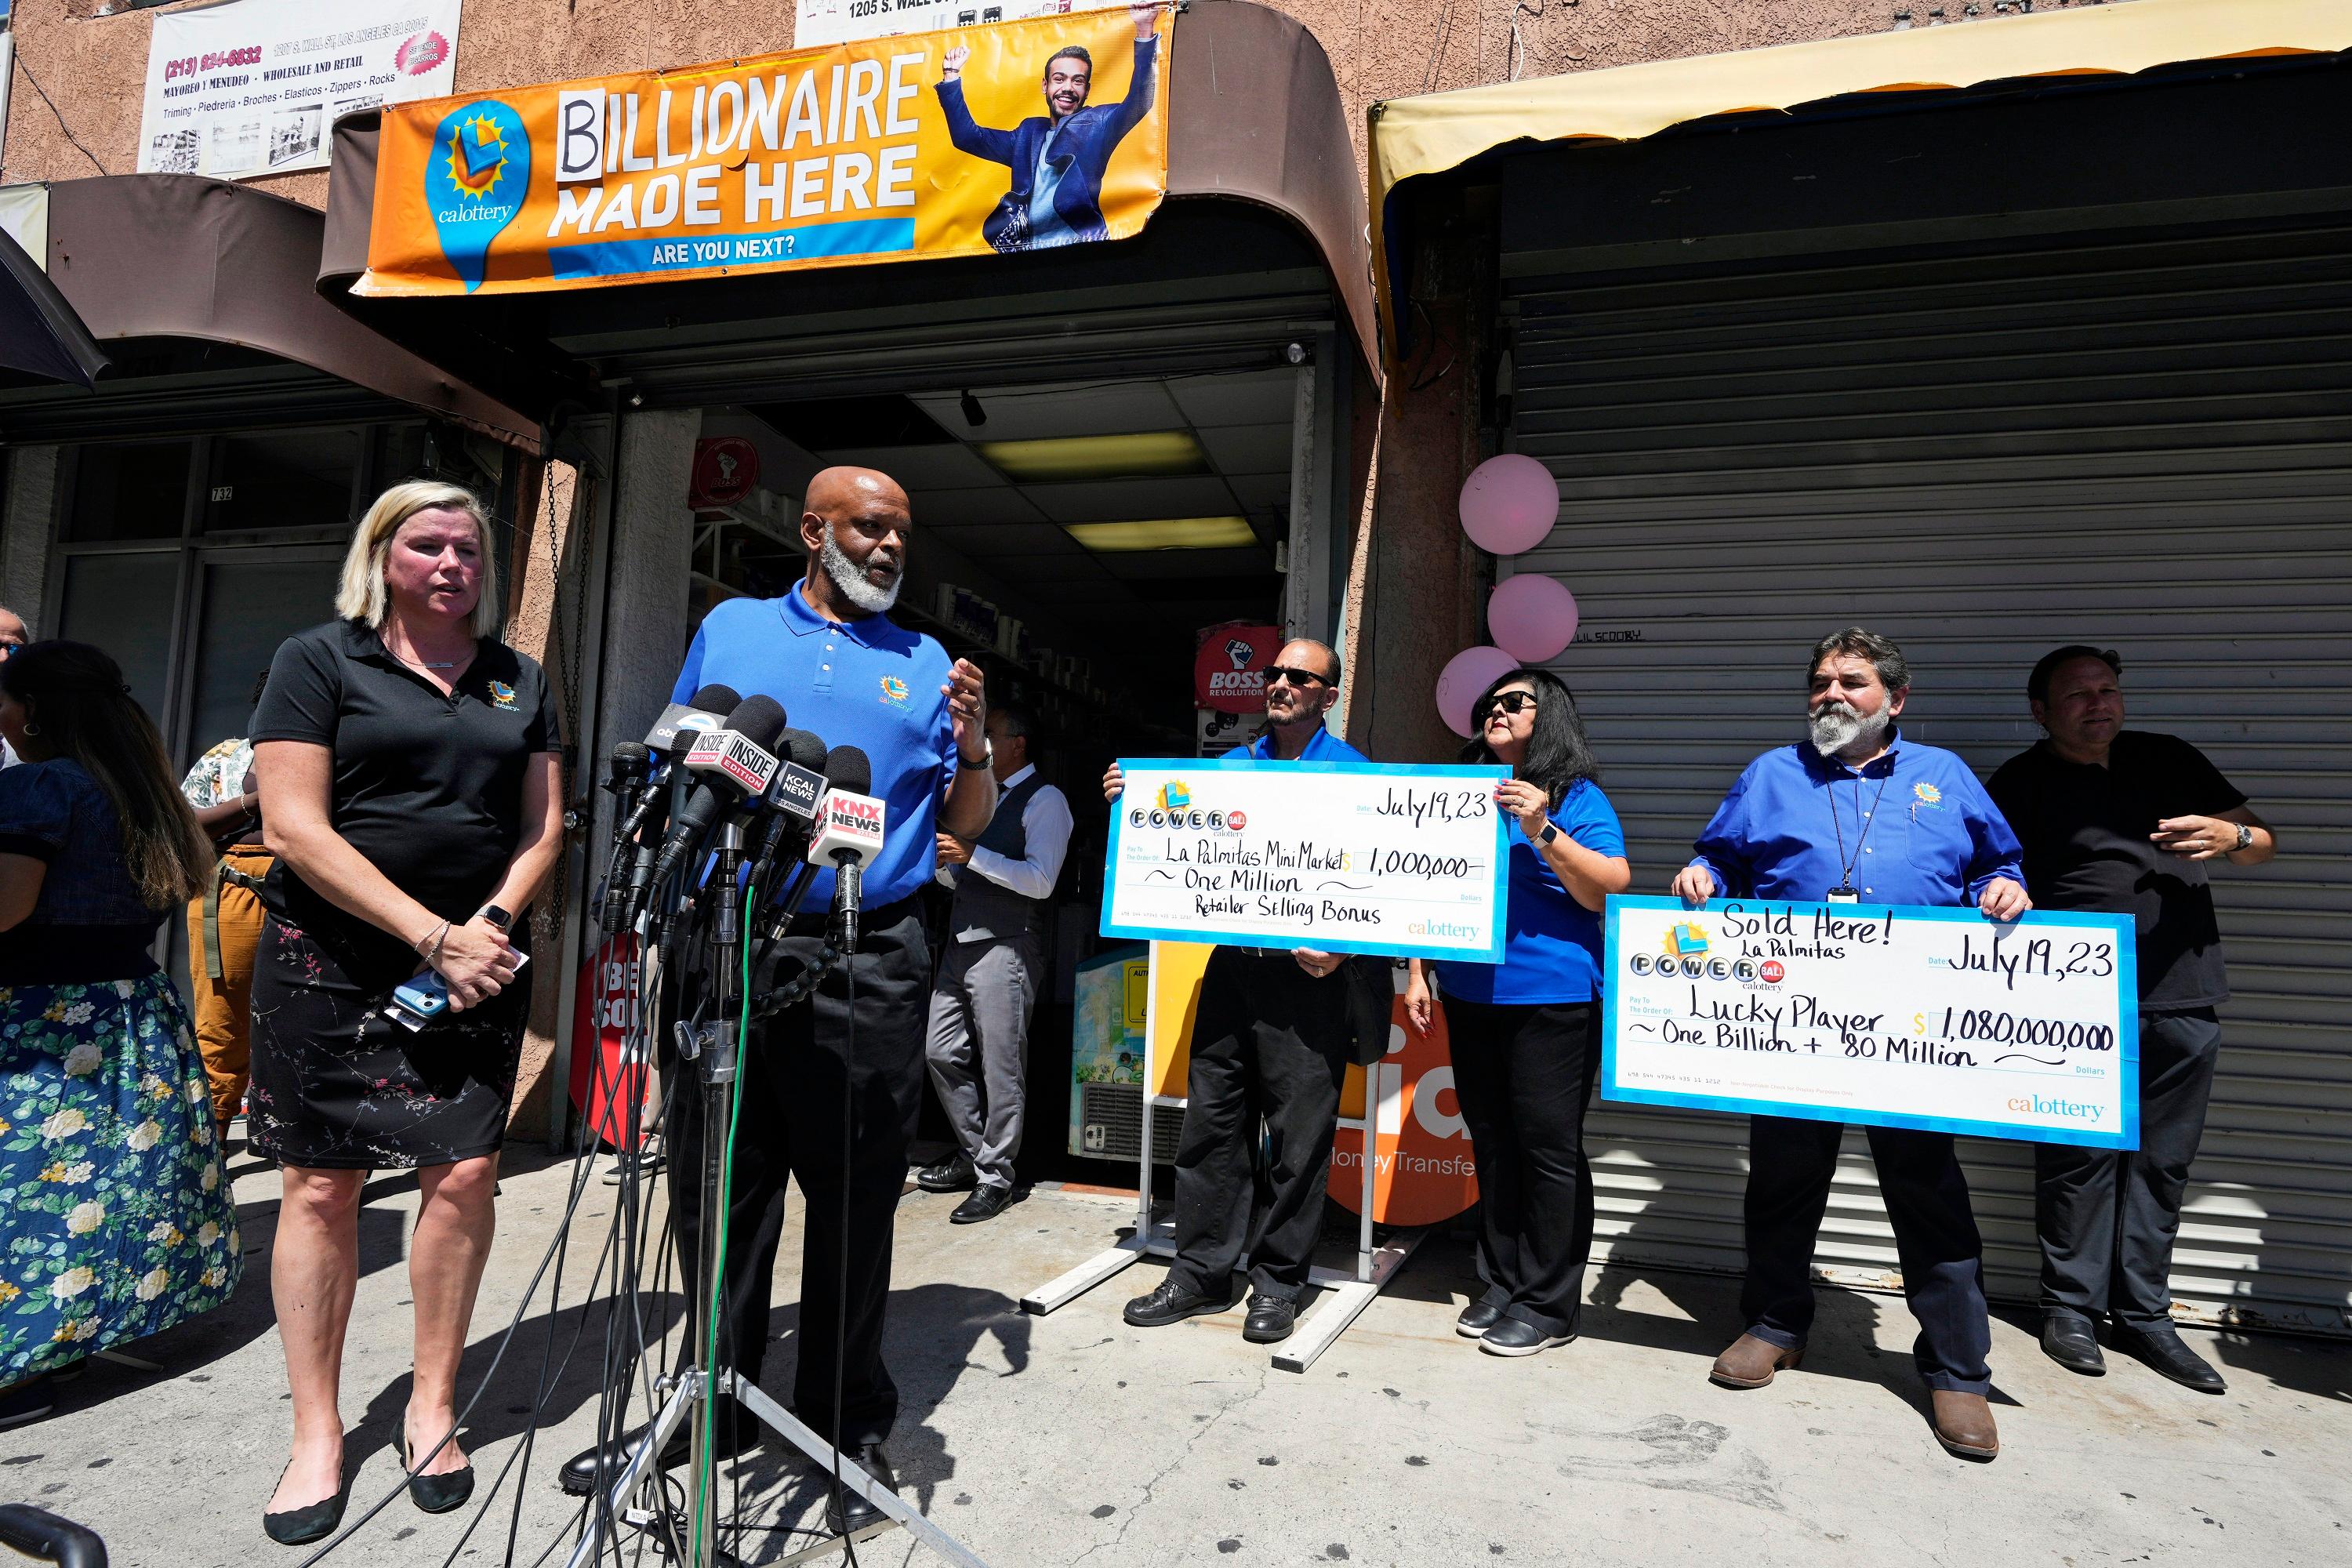 Attention Turns to Mega Millions After California Store Sells Winning Powerball Ticket